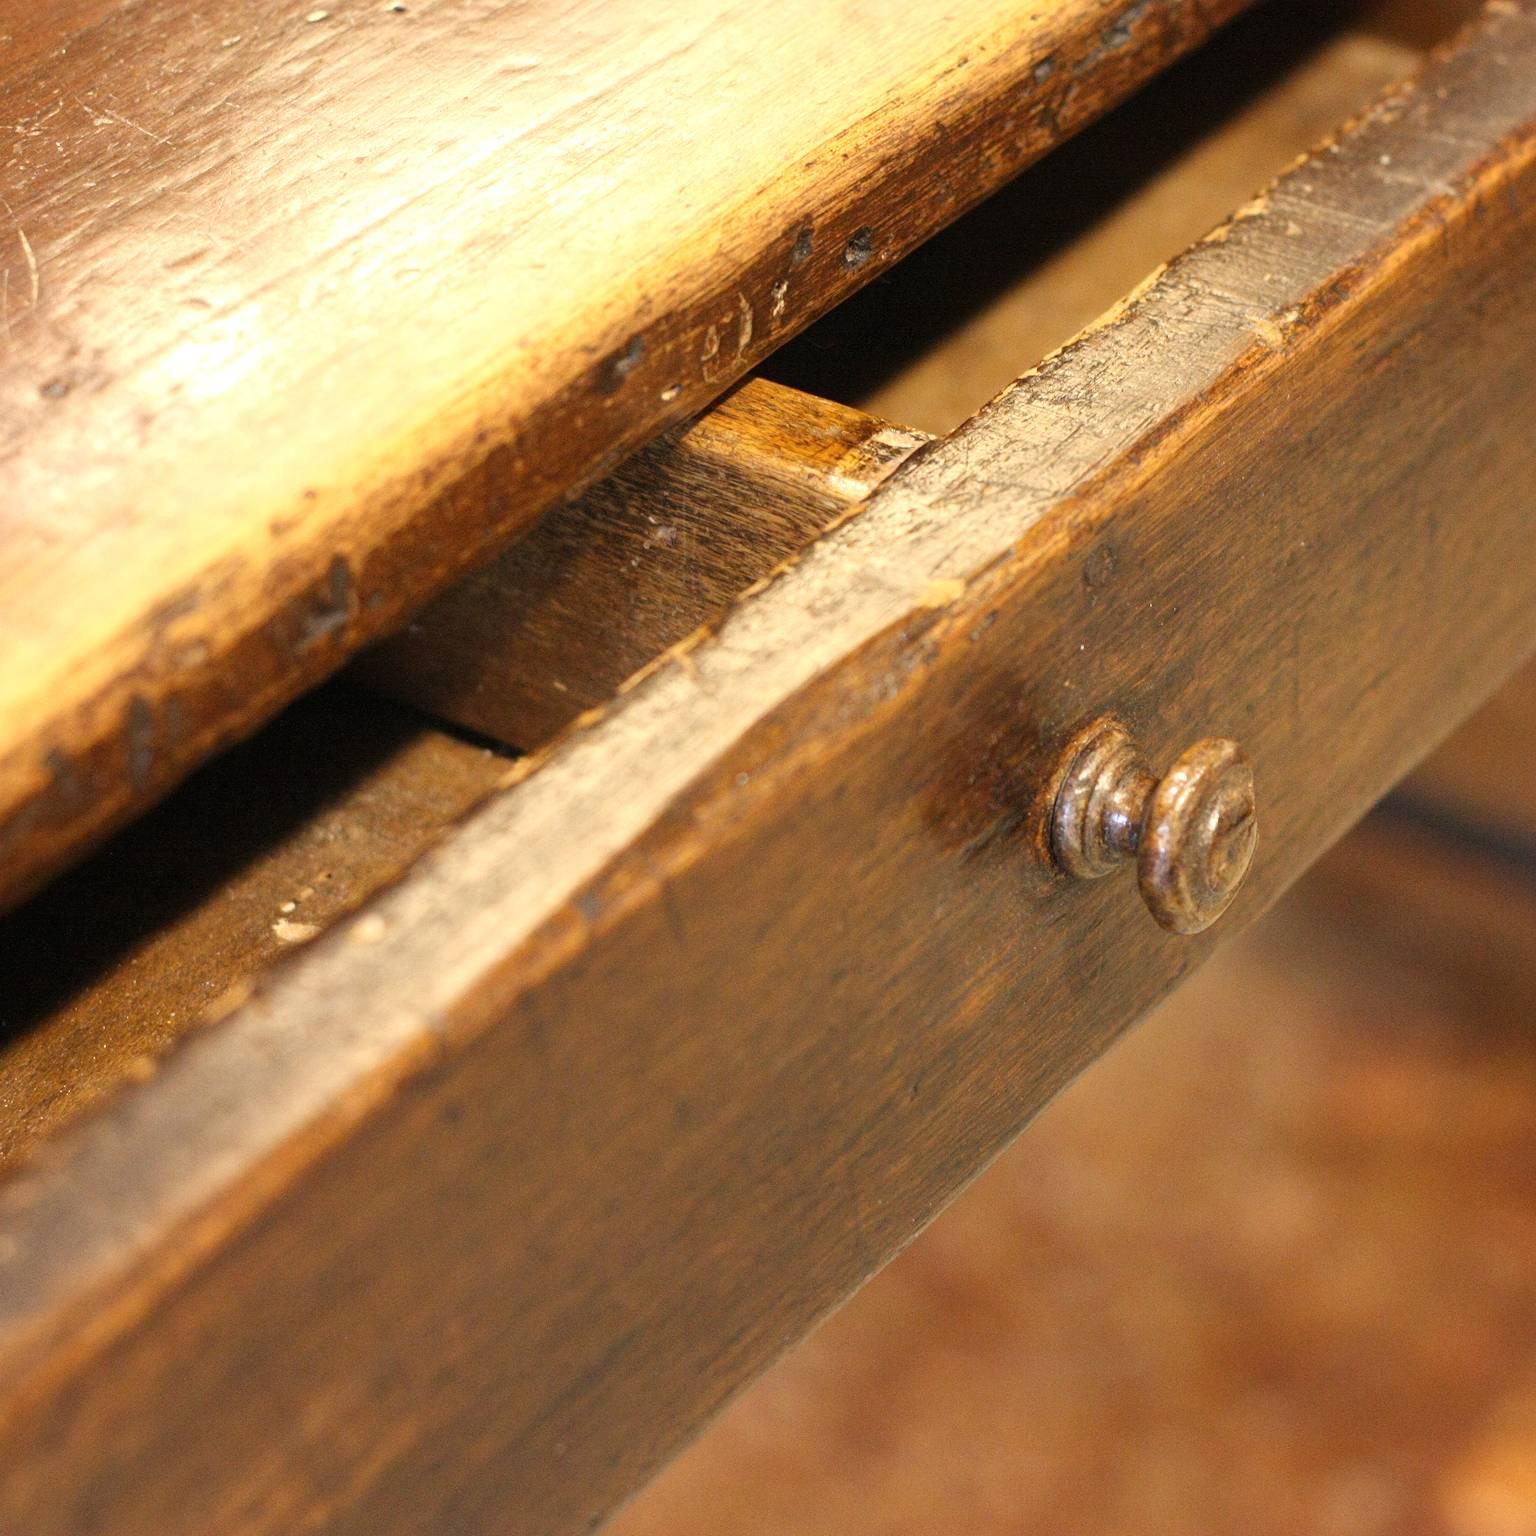 A French 18th century wooden farmhouse table with single drawer, straight legs and cross stretcher. This French farm table features a rectangular top overhanging a simple apron with small single drawer and inner divider. The table is raised on four